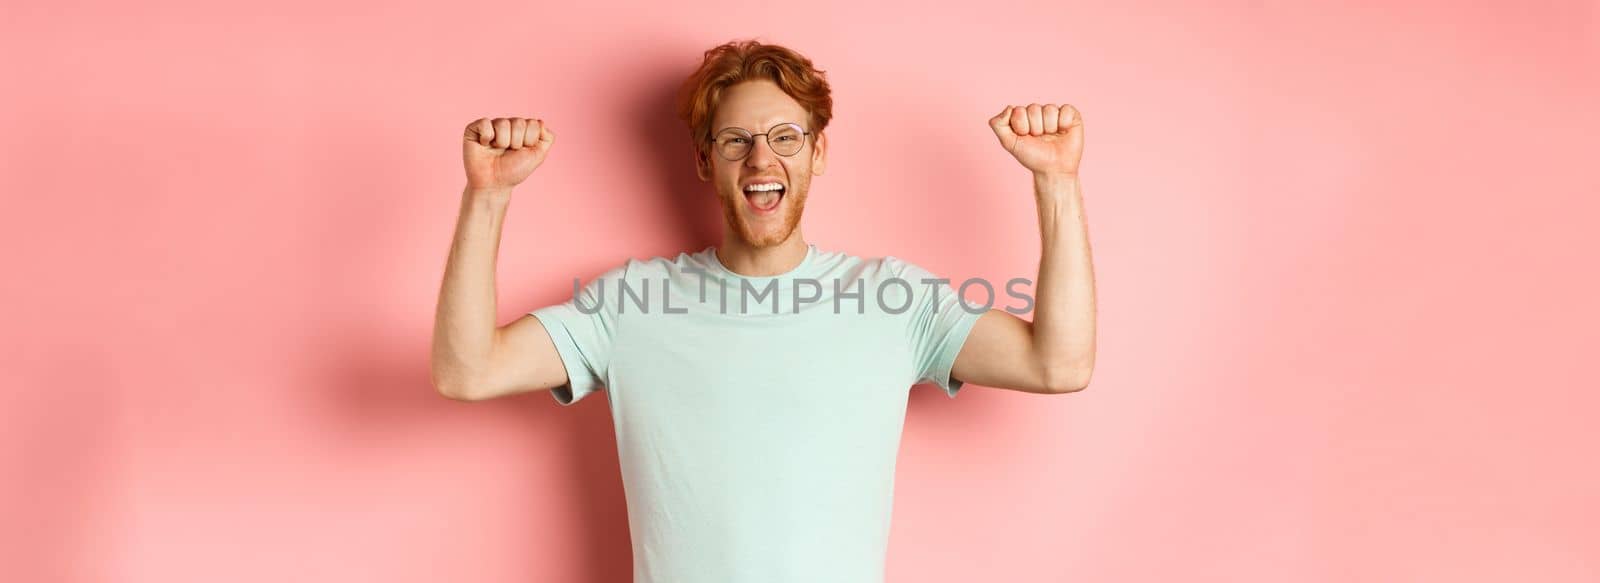 Happy winner with red hair and beard celebrating victory, shouting yes with joy and raising hands up, enjoy success, standing over pink background.